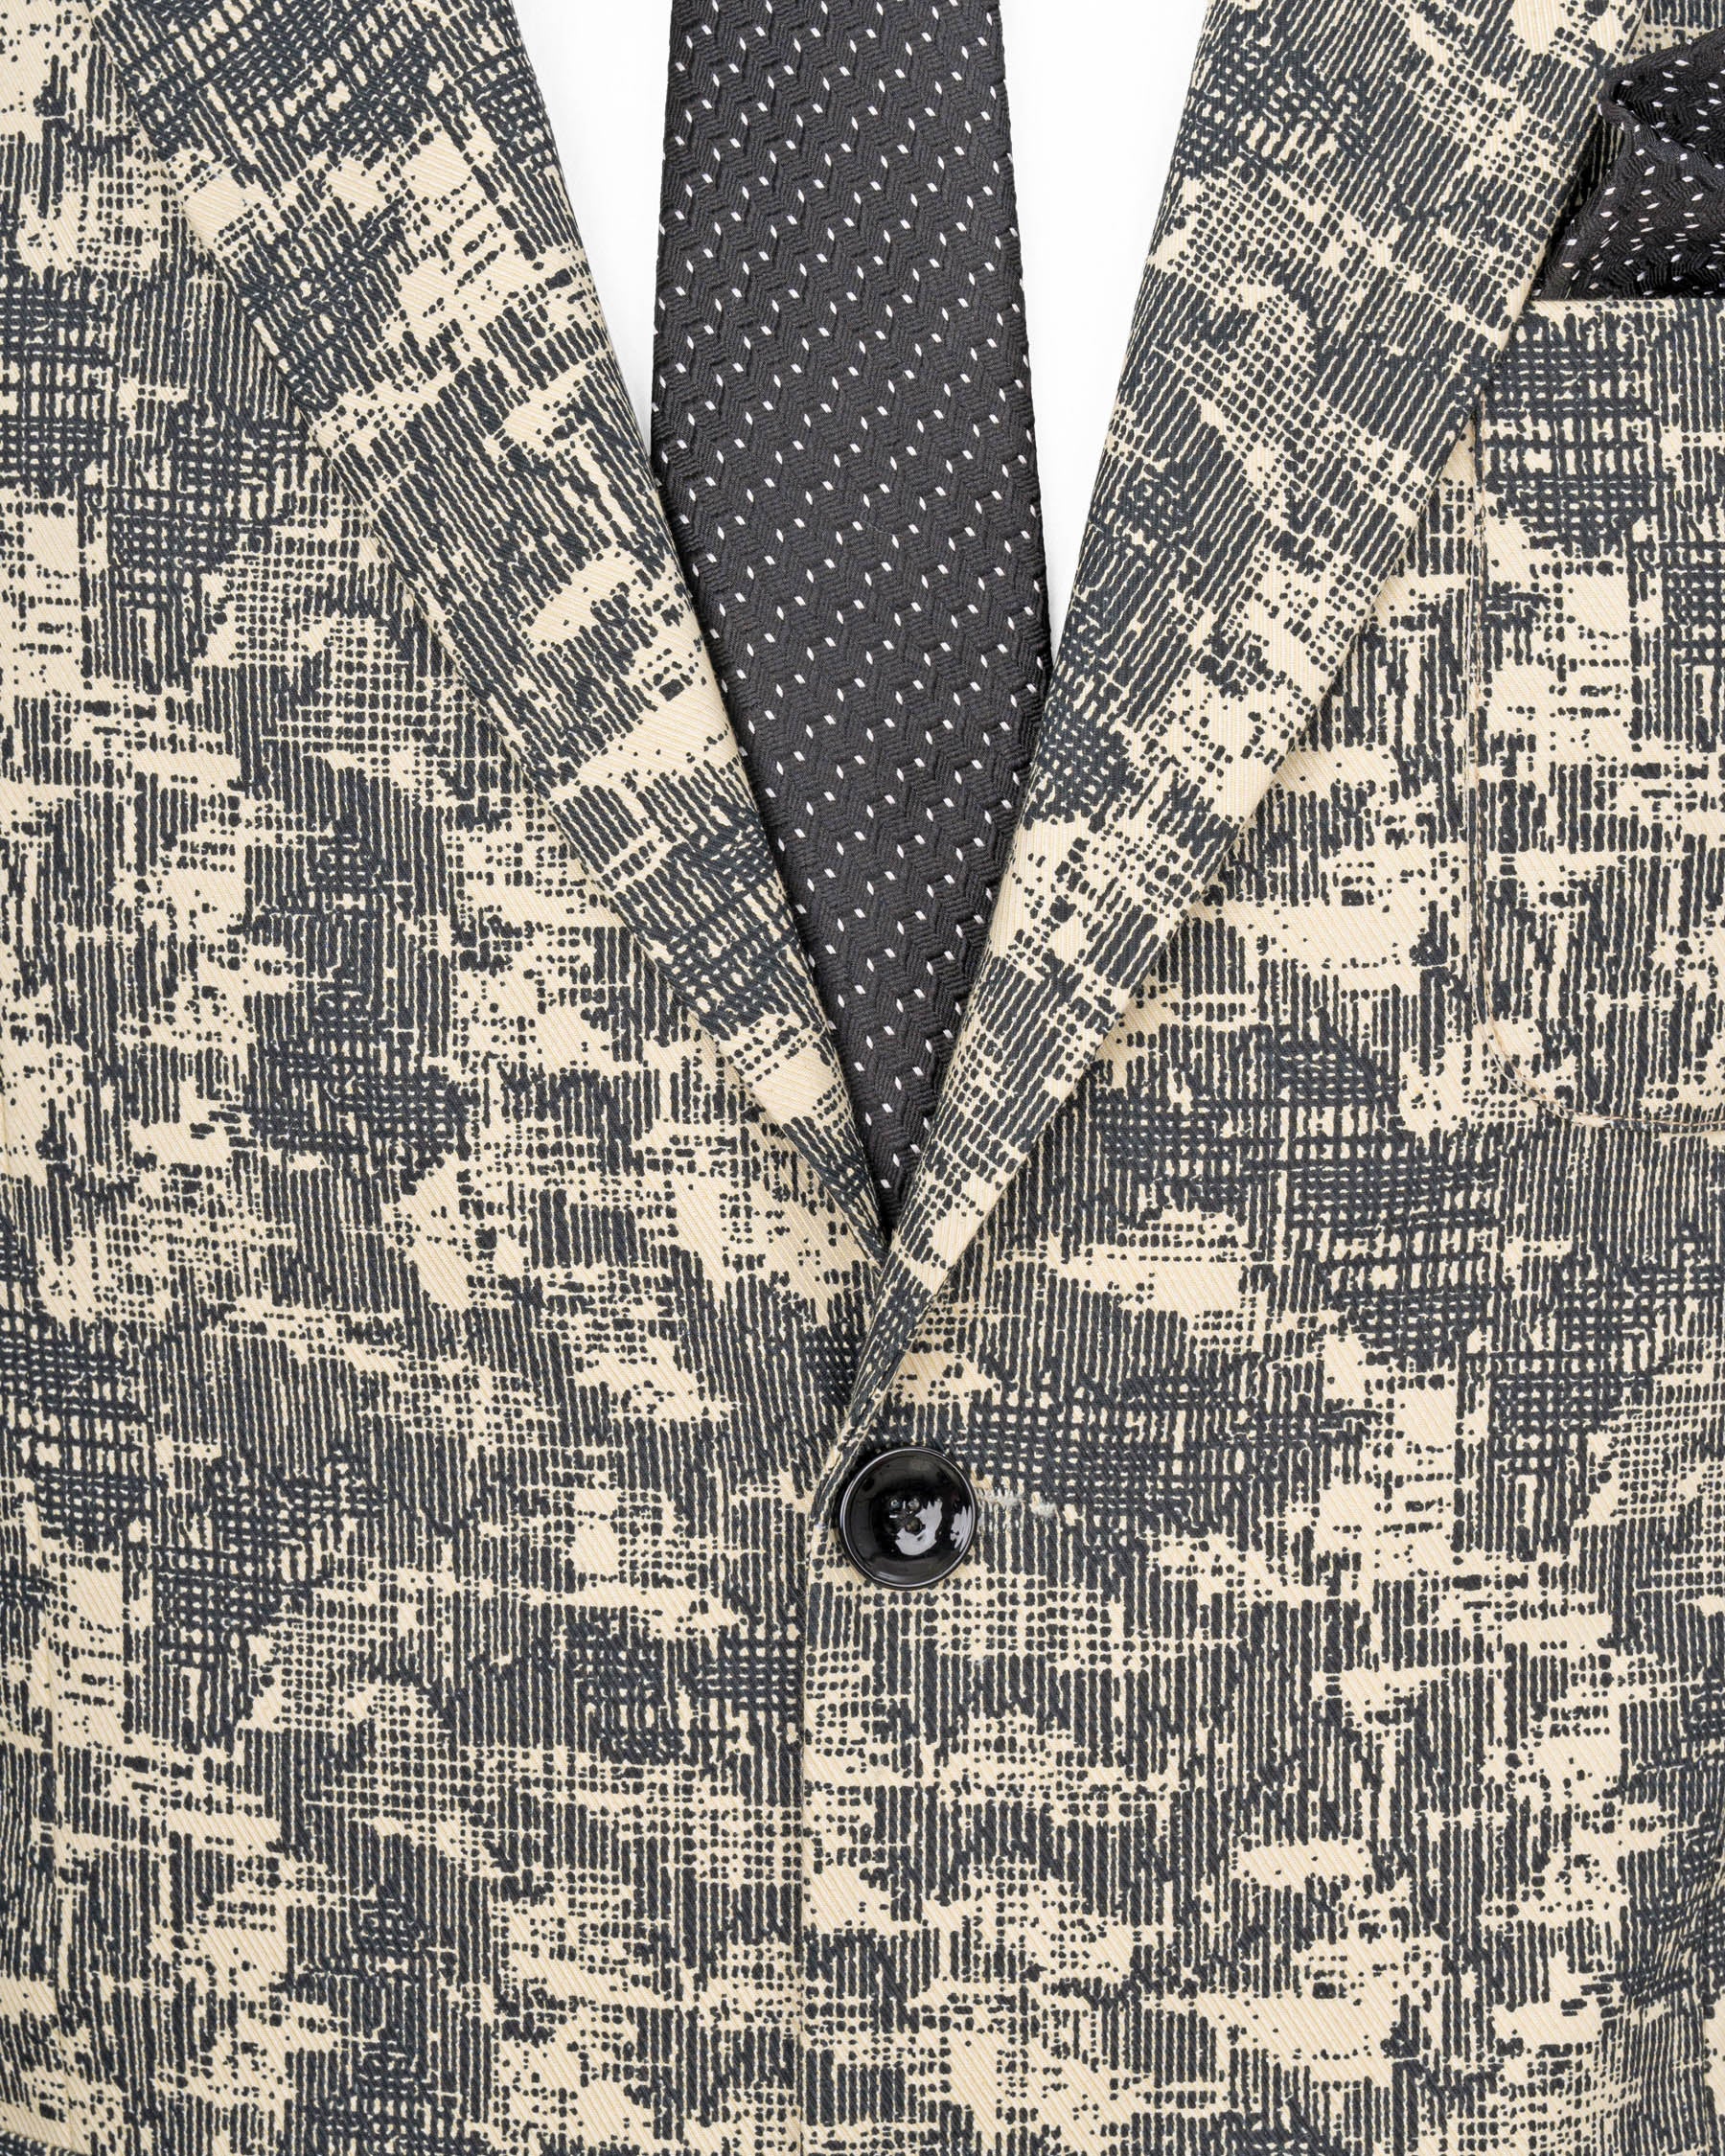 Bastille and Champagne Beige Abstract Print Designer Blazer BL1680-SB-PP-36, BL1680-SB-PP-38, BL1680-SB-PP-40, BL1680-SB-PP-42, BL1680-SB-PP-44, BL1680-SB-PP-46, BL1680-SB-PP-48, BL1680-SB-PP-50, BL1680-SB-PP-52, BL1680-SB-PP-54, BL1680-SB-PP-56, BL1680-SB-PP-58, BL1680-SB-PP-60